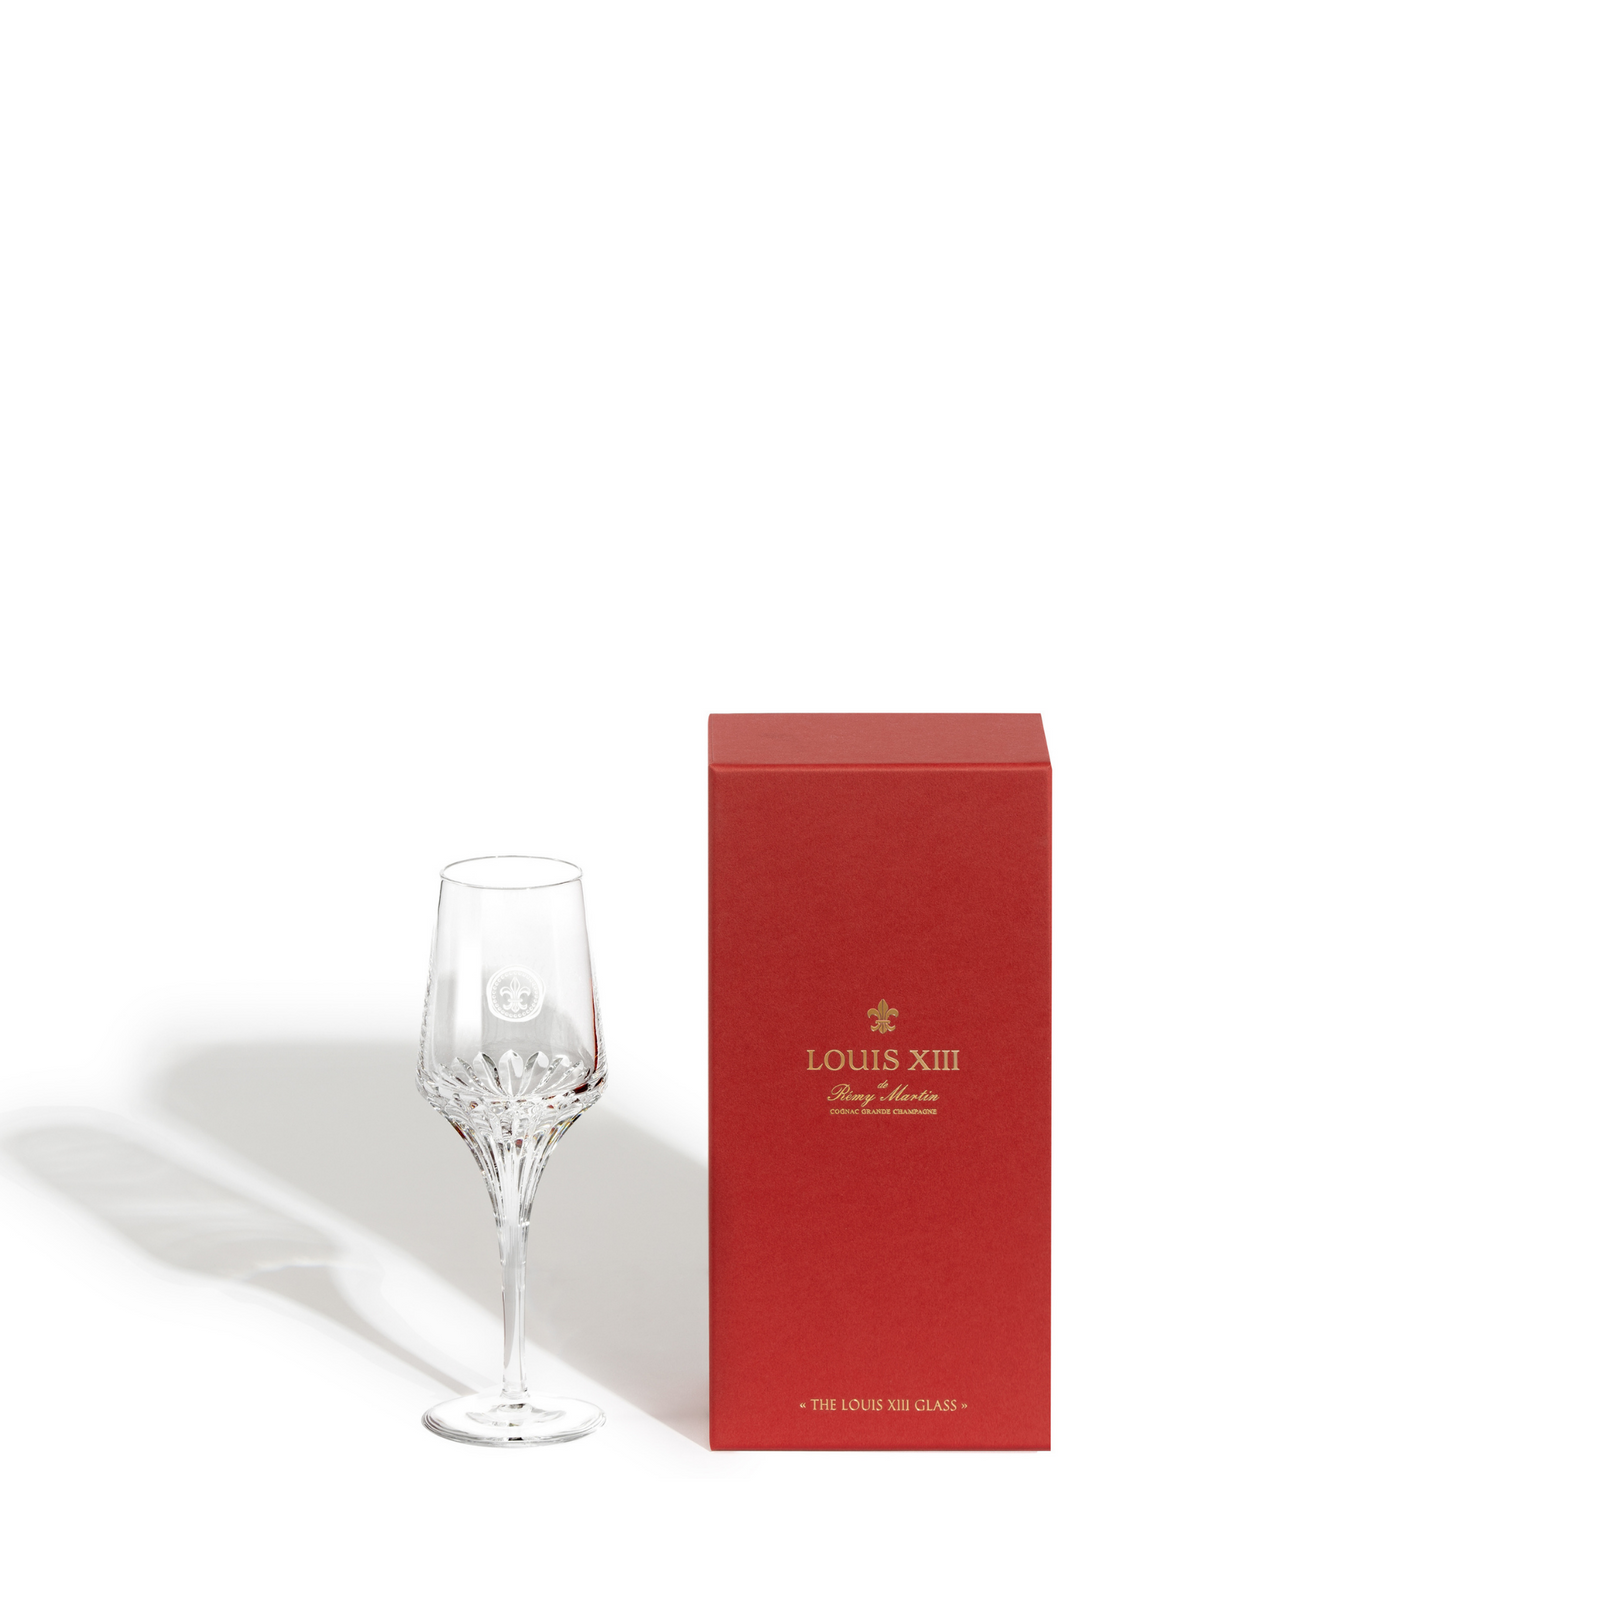 A packshot of a LOUIS XIII single crystal glass with its red packaging